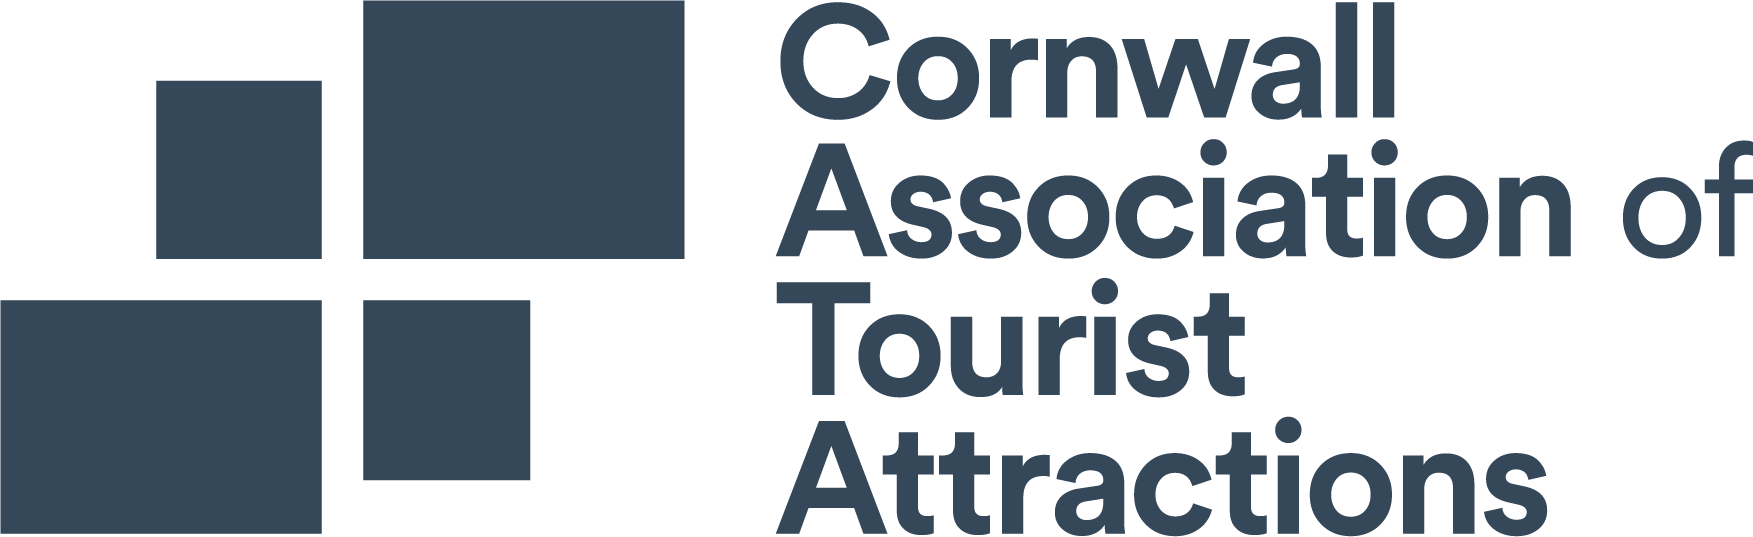 Cornwall Association of Tourism